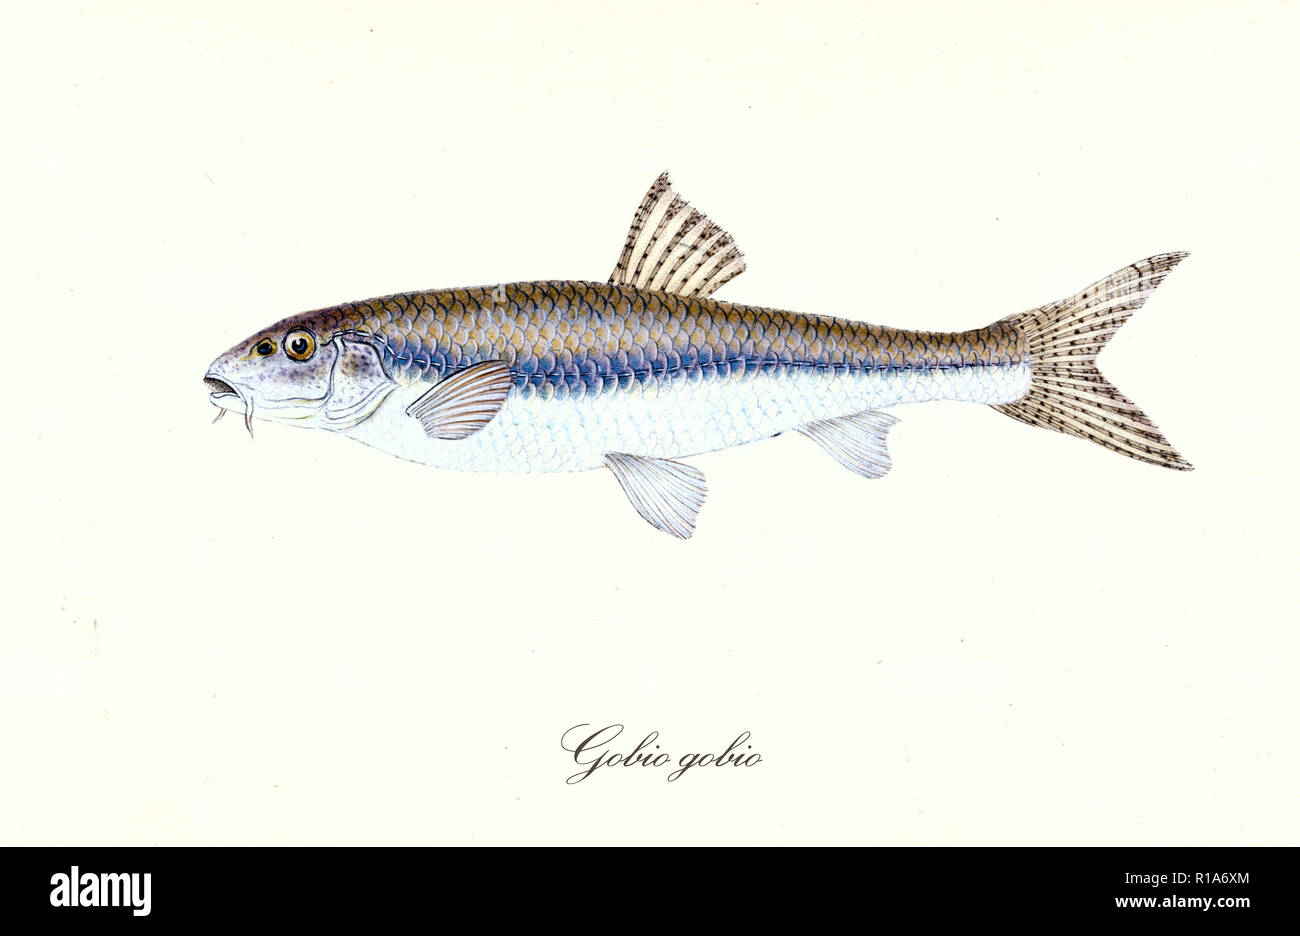 Ancient colorful illustration of Gudgeon (Gobio gobio), Side view of the fish with its brownish back and white stomach, isolated element on white background. By Edward Donovan. London 1802 Stock Photo